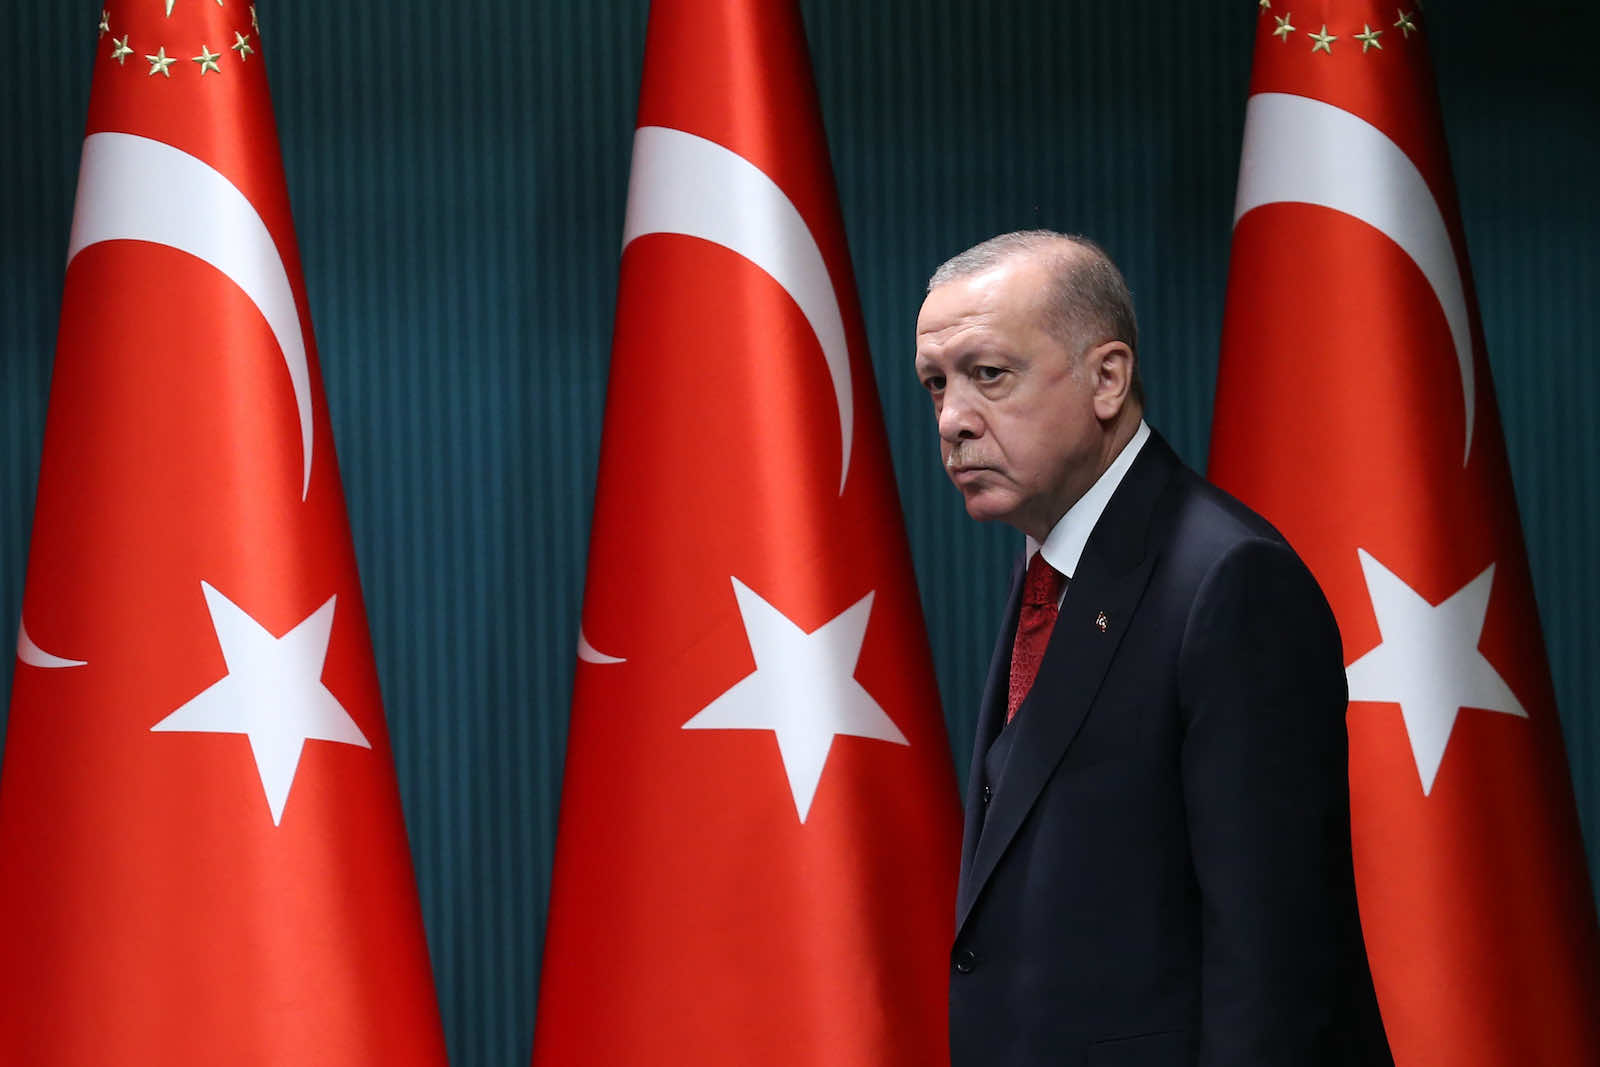 Once seen as a champion of freedom, Recep Tayyip Erdoǧan’s international reputation has lost its sheen (Adem Altan/AFP via Getty Images)